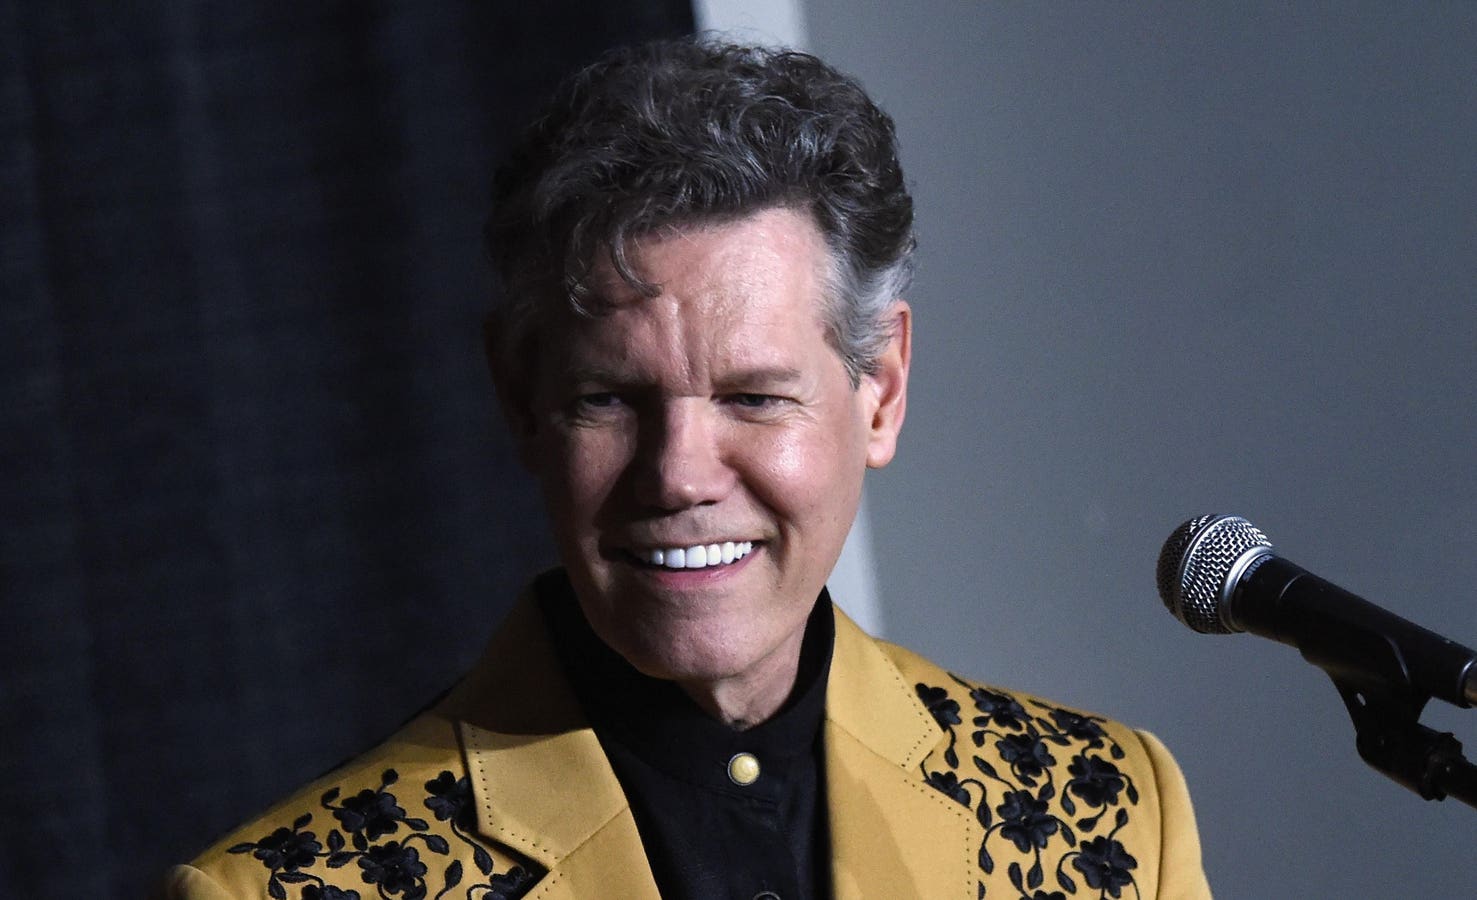 After Stroke, Randy Travis Sings New Song Through AI